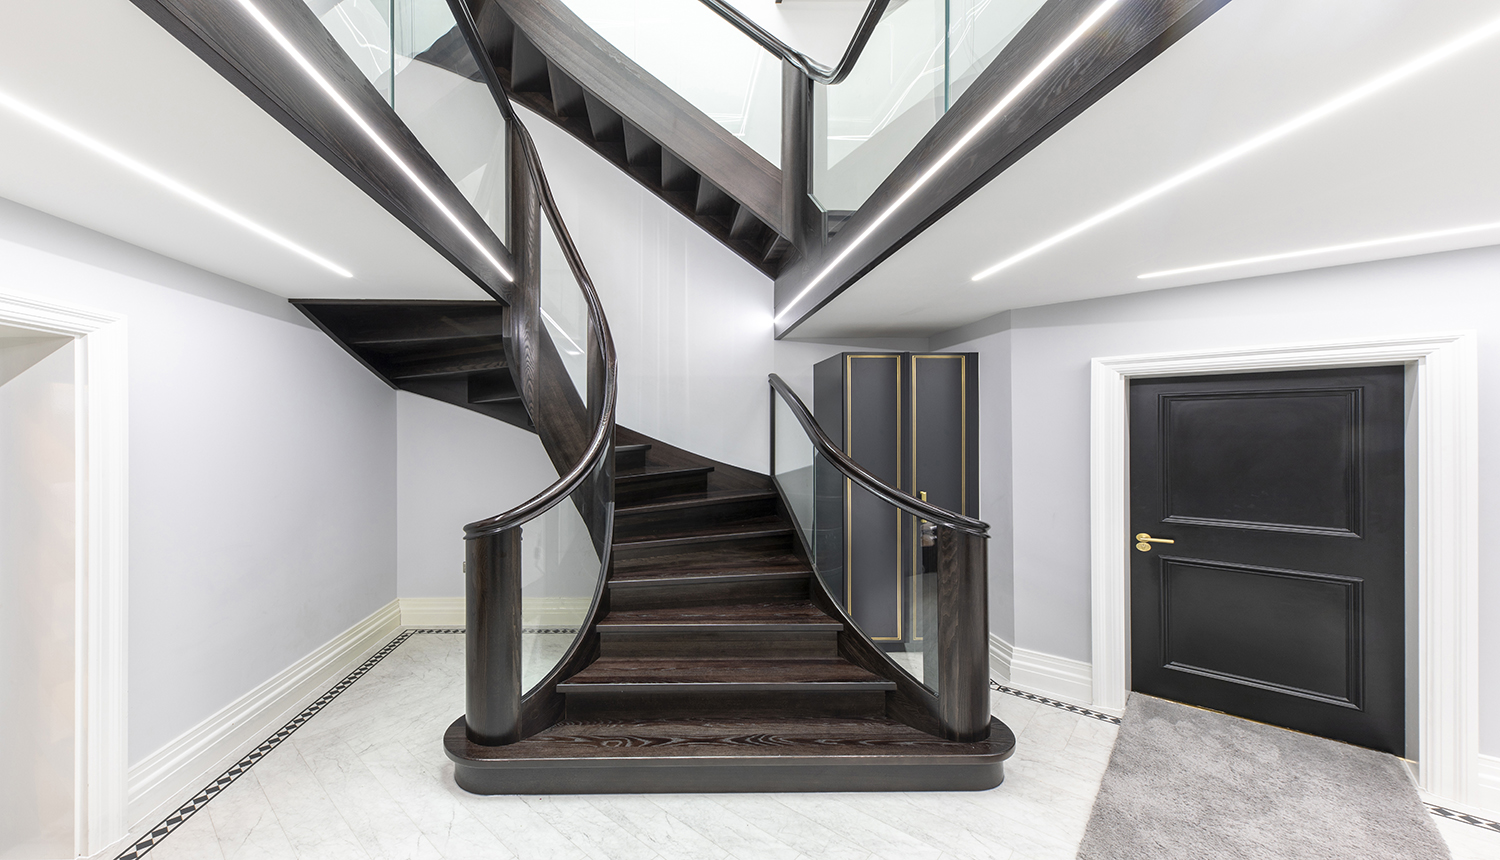 The choice of materials plays a pivotal role in the crafting of a Custom Staircase